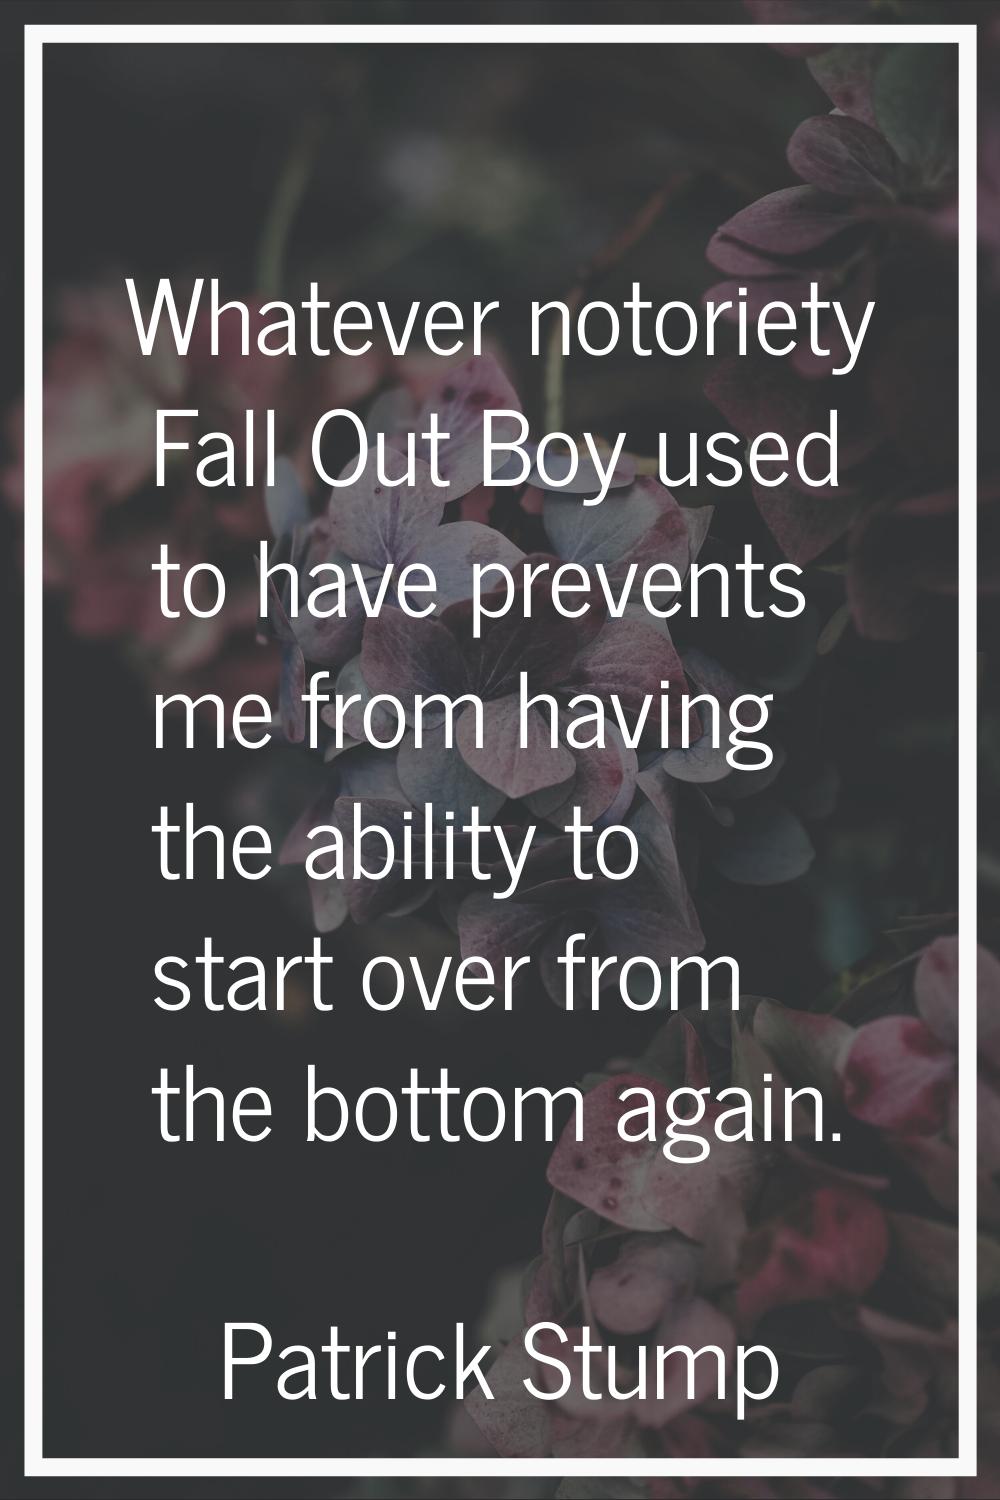 Whatever notoriety Fall Out Boy used to have prevents me from having the ability to start over from